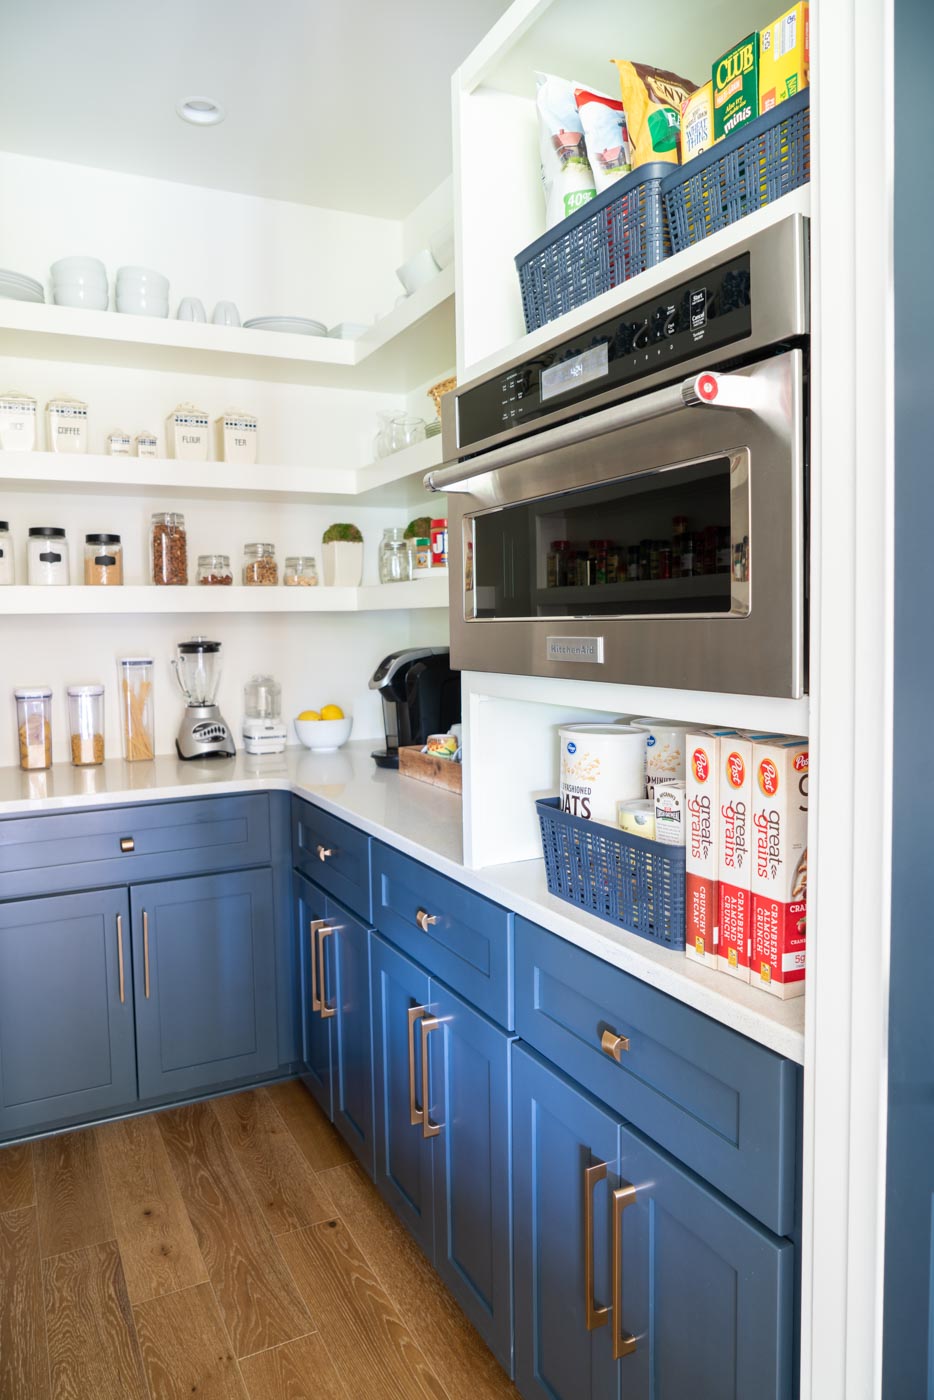 A organized kitchen pantry with a KitchenAid microwave and storage baskets and containers for pantry items